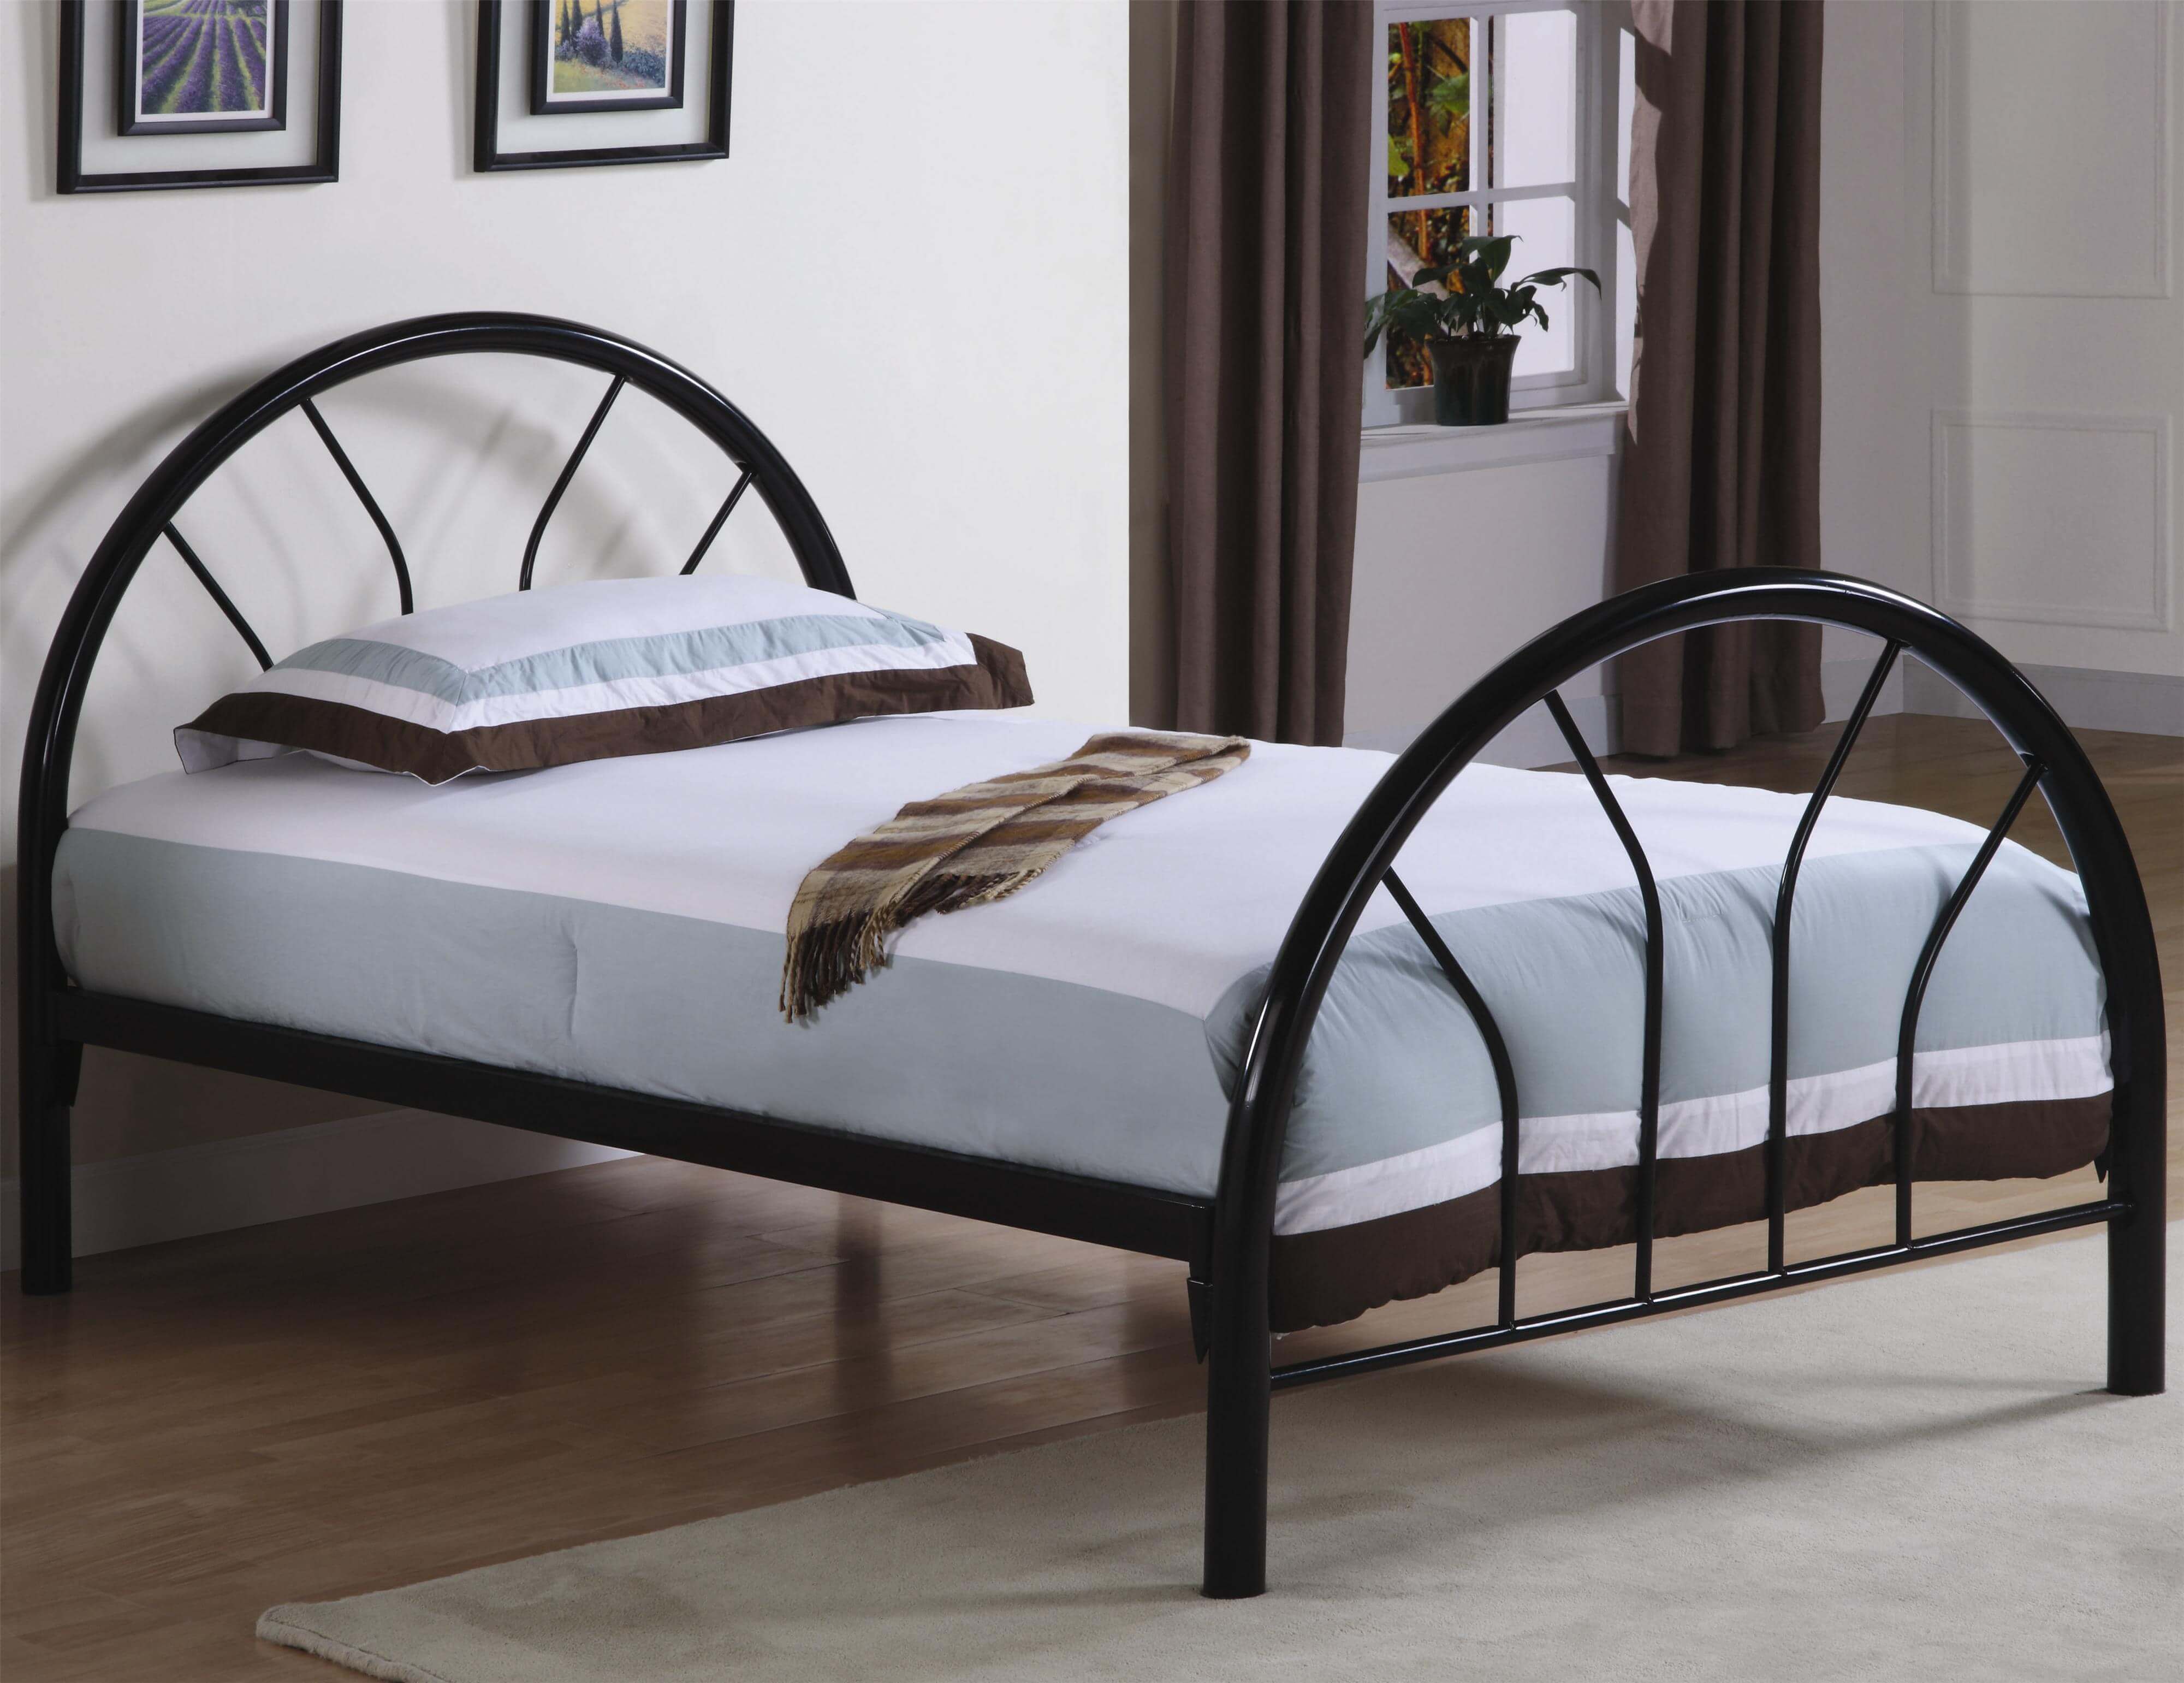 New Metal Twin Size Kid Bed Frame with Headboard and Footboard 